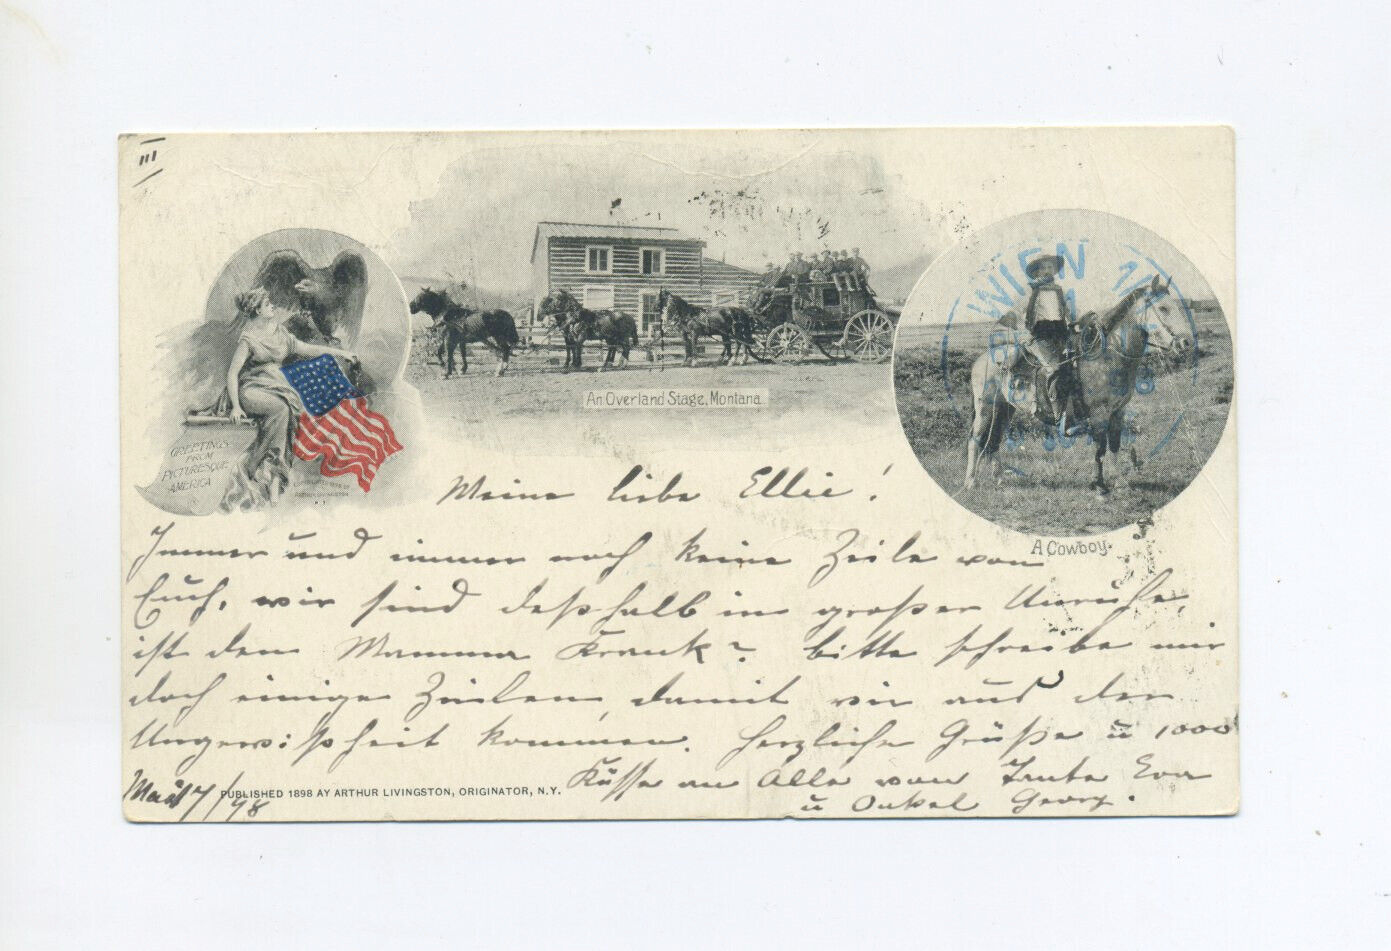 1898 US patriotic souvenir postcard with overland stage Montana and Cowboy